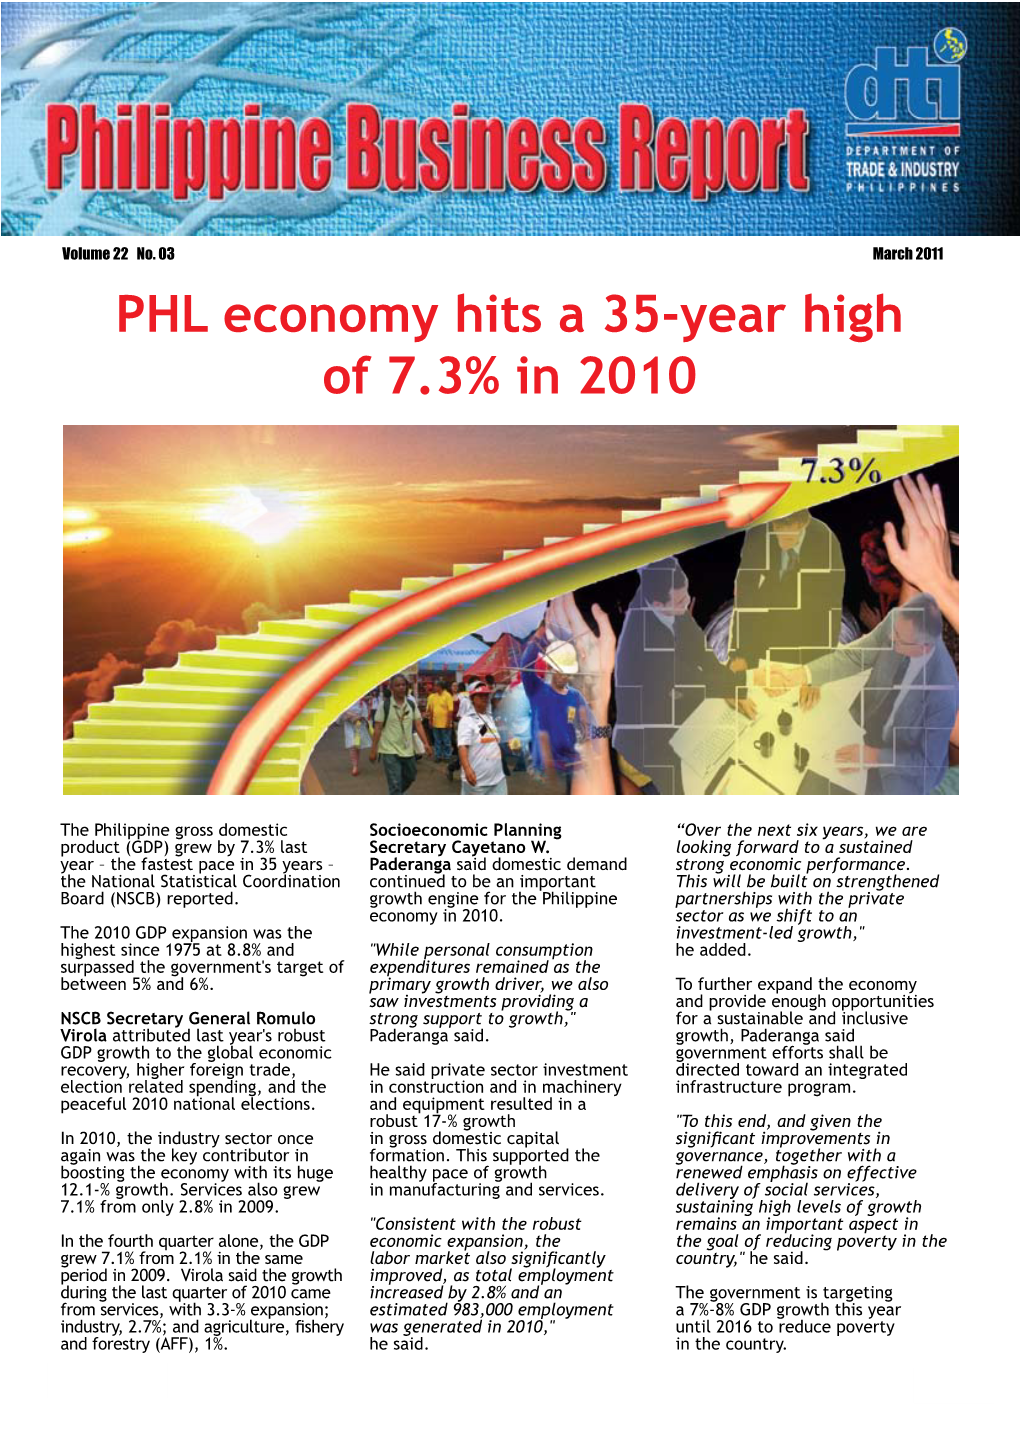 Philippine Business Report, March 2011